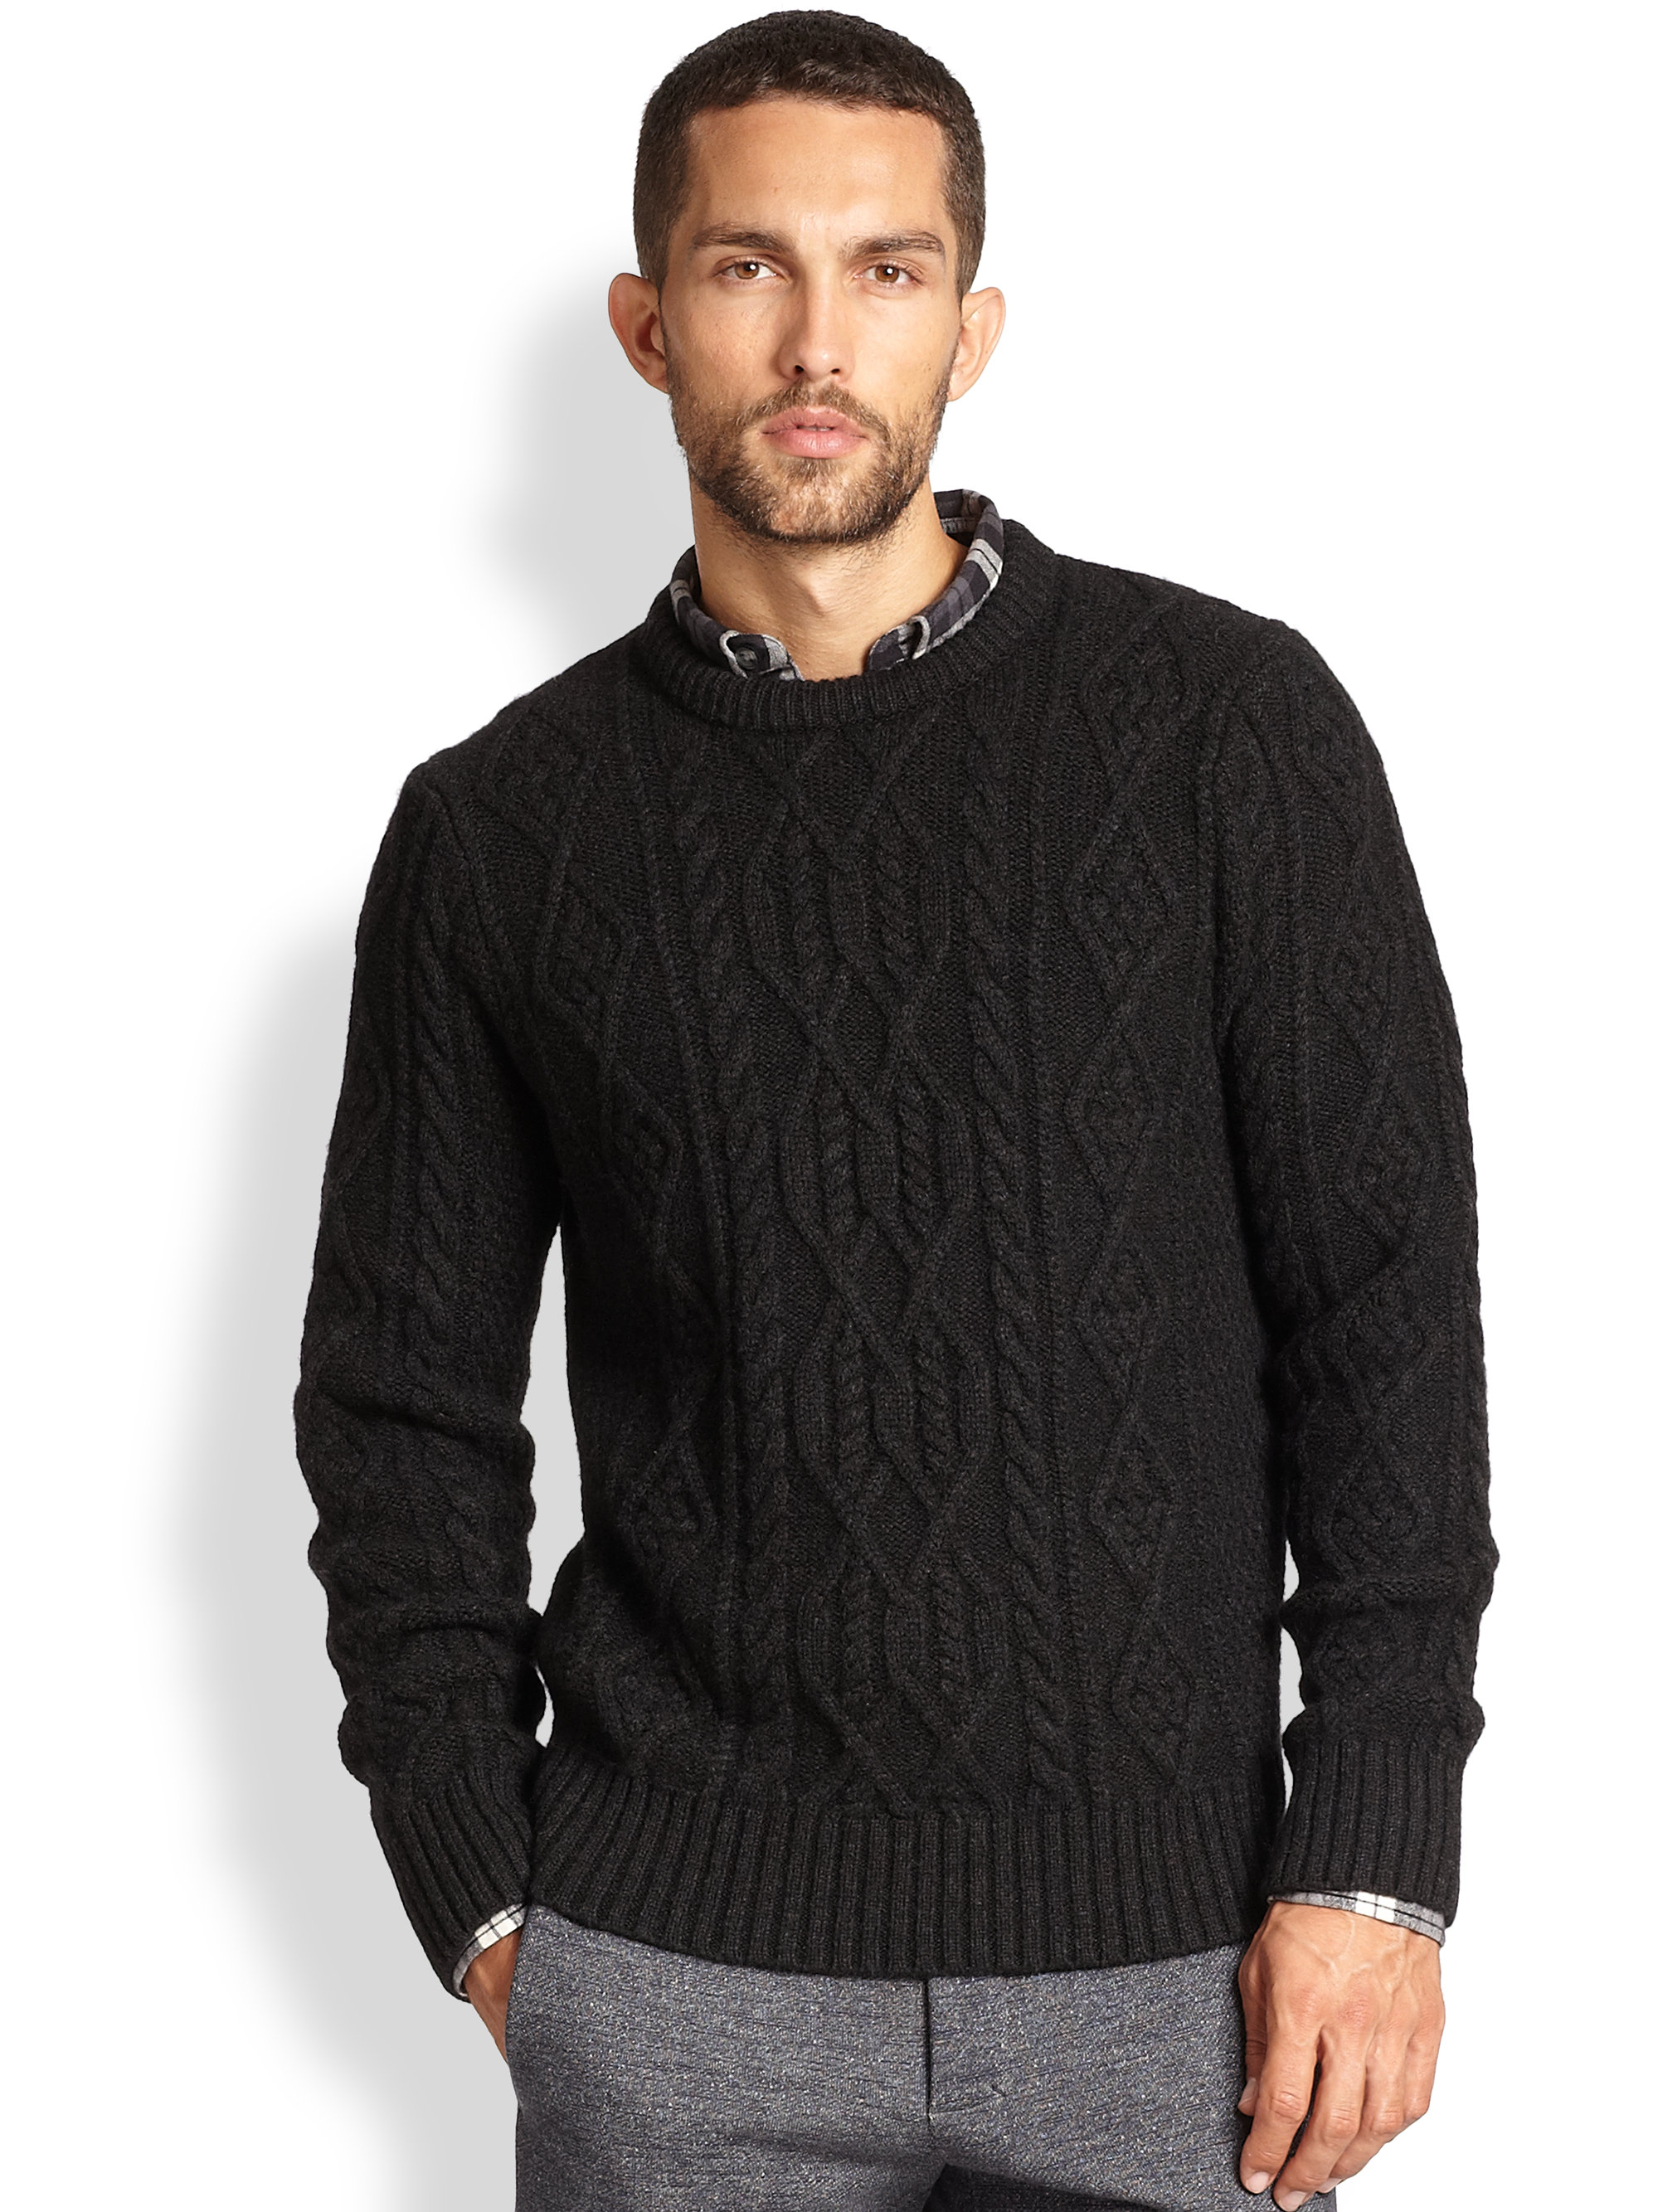 Lyst - Vince Cable Knit Crewneck Sweater in Black for Men